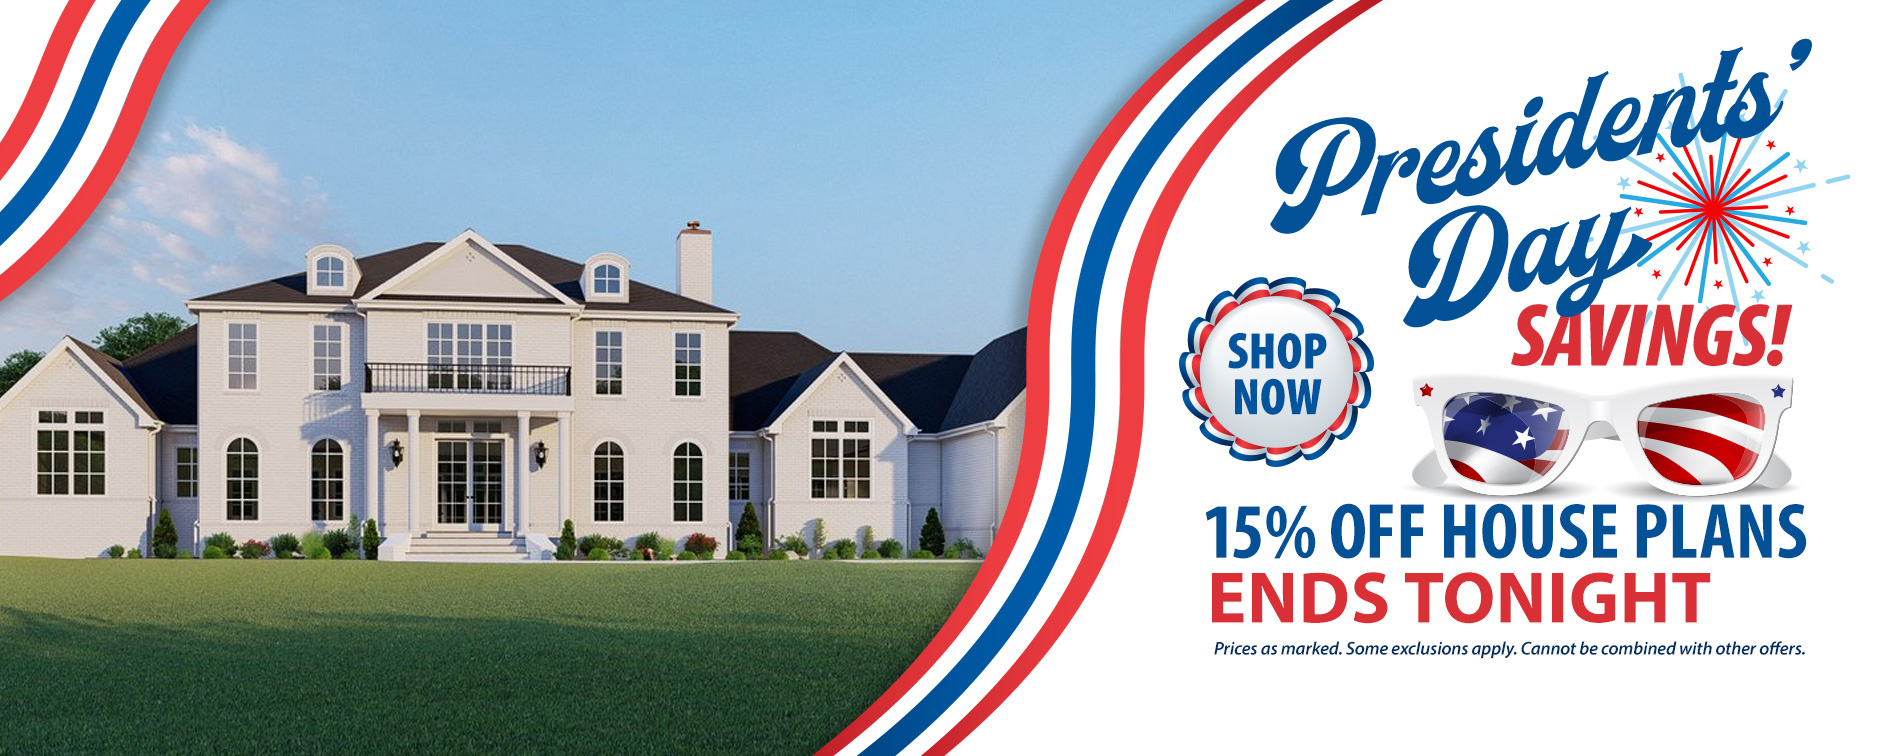 Get 15% Off Dream House Plans - Offer Ends Tonight at Midnight